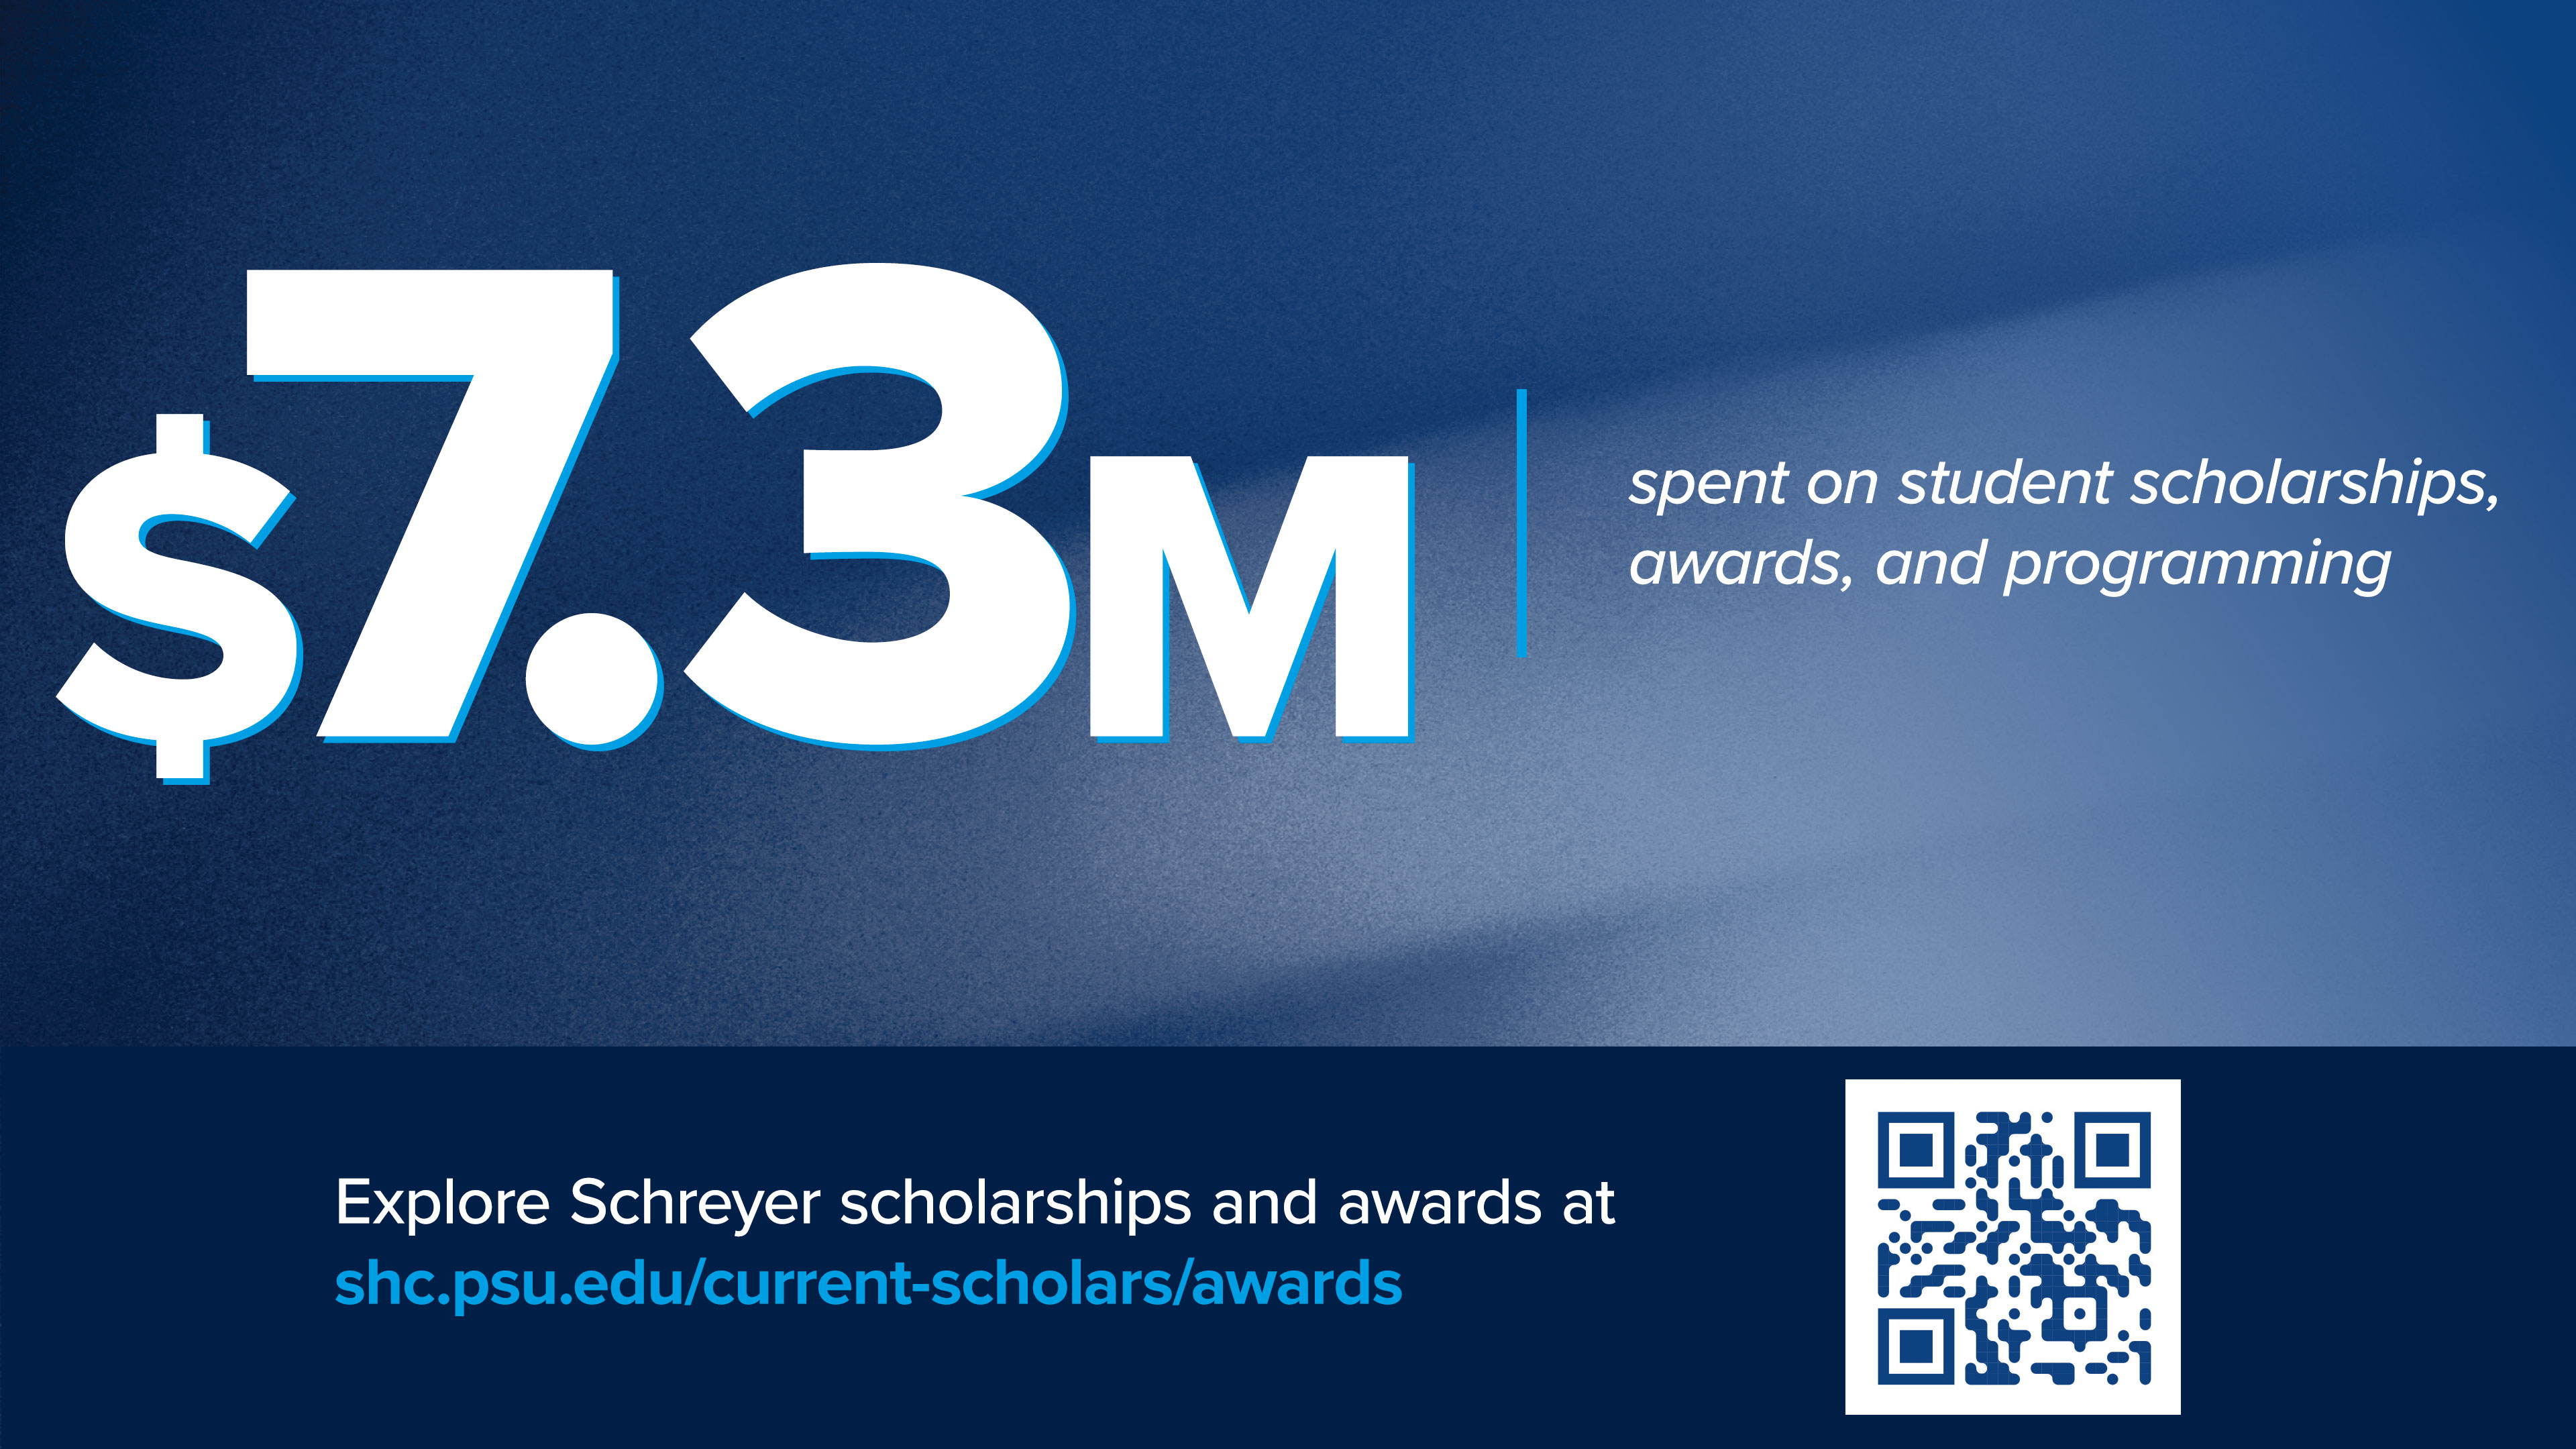 The Schreyer Honors College spent over $7.3 million on student scholarships, awards and programming